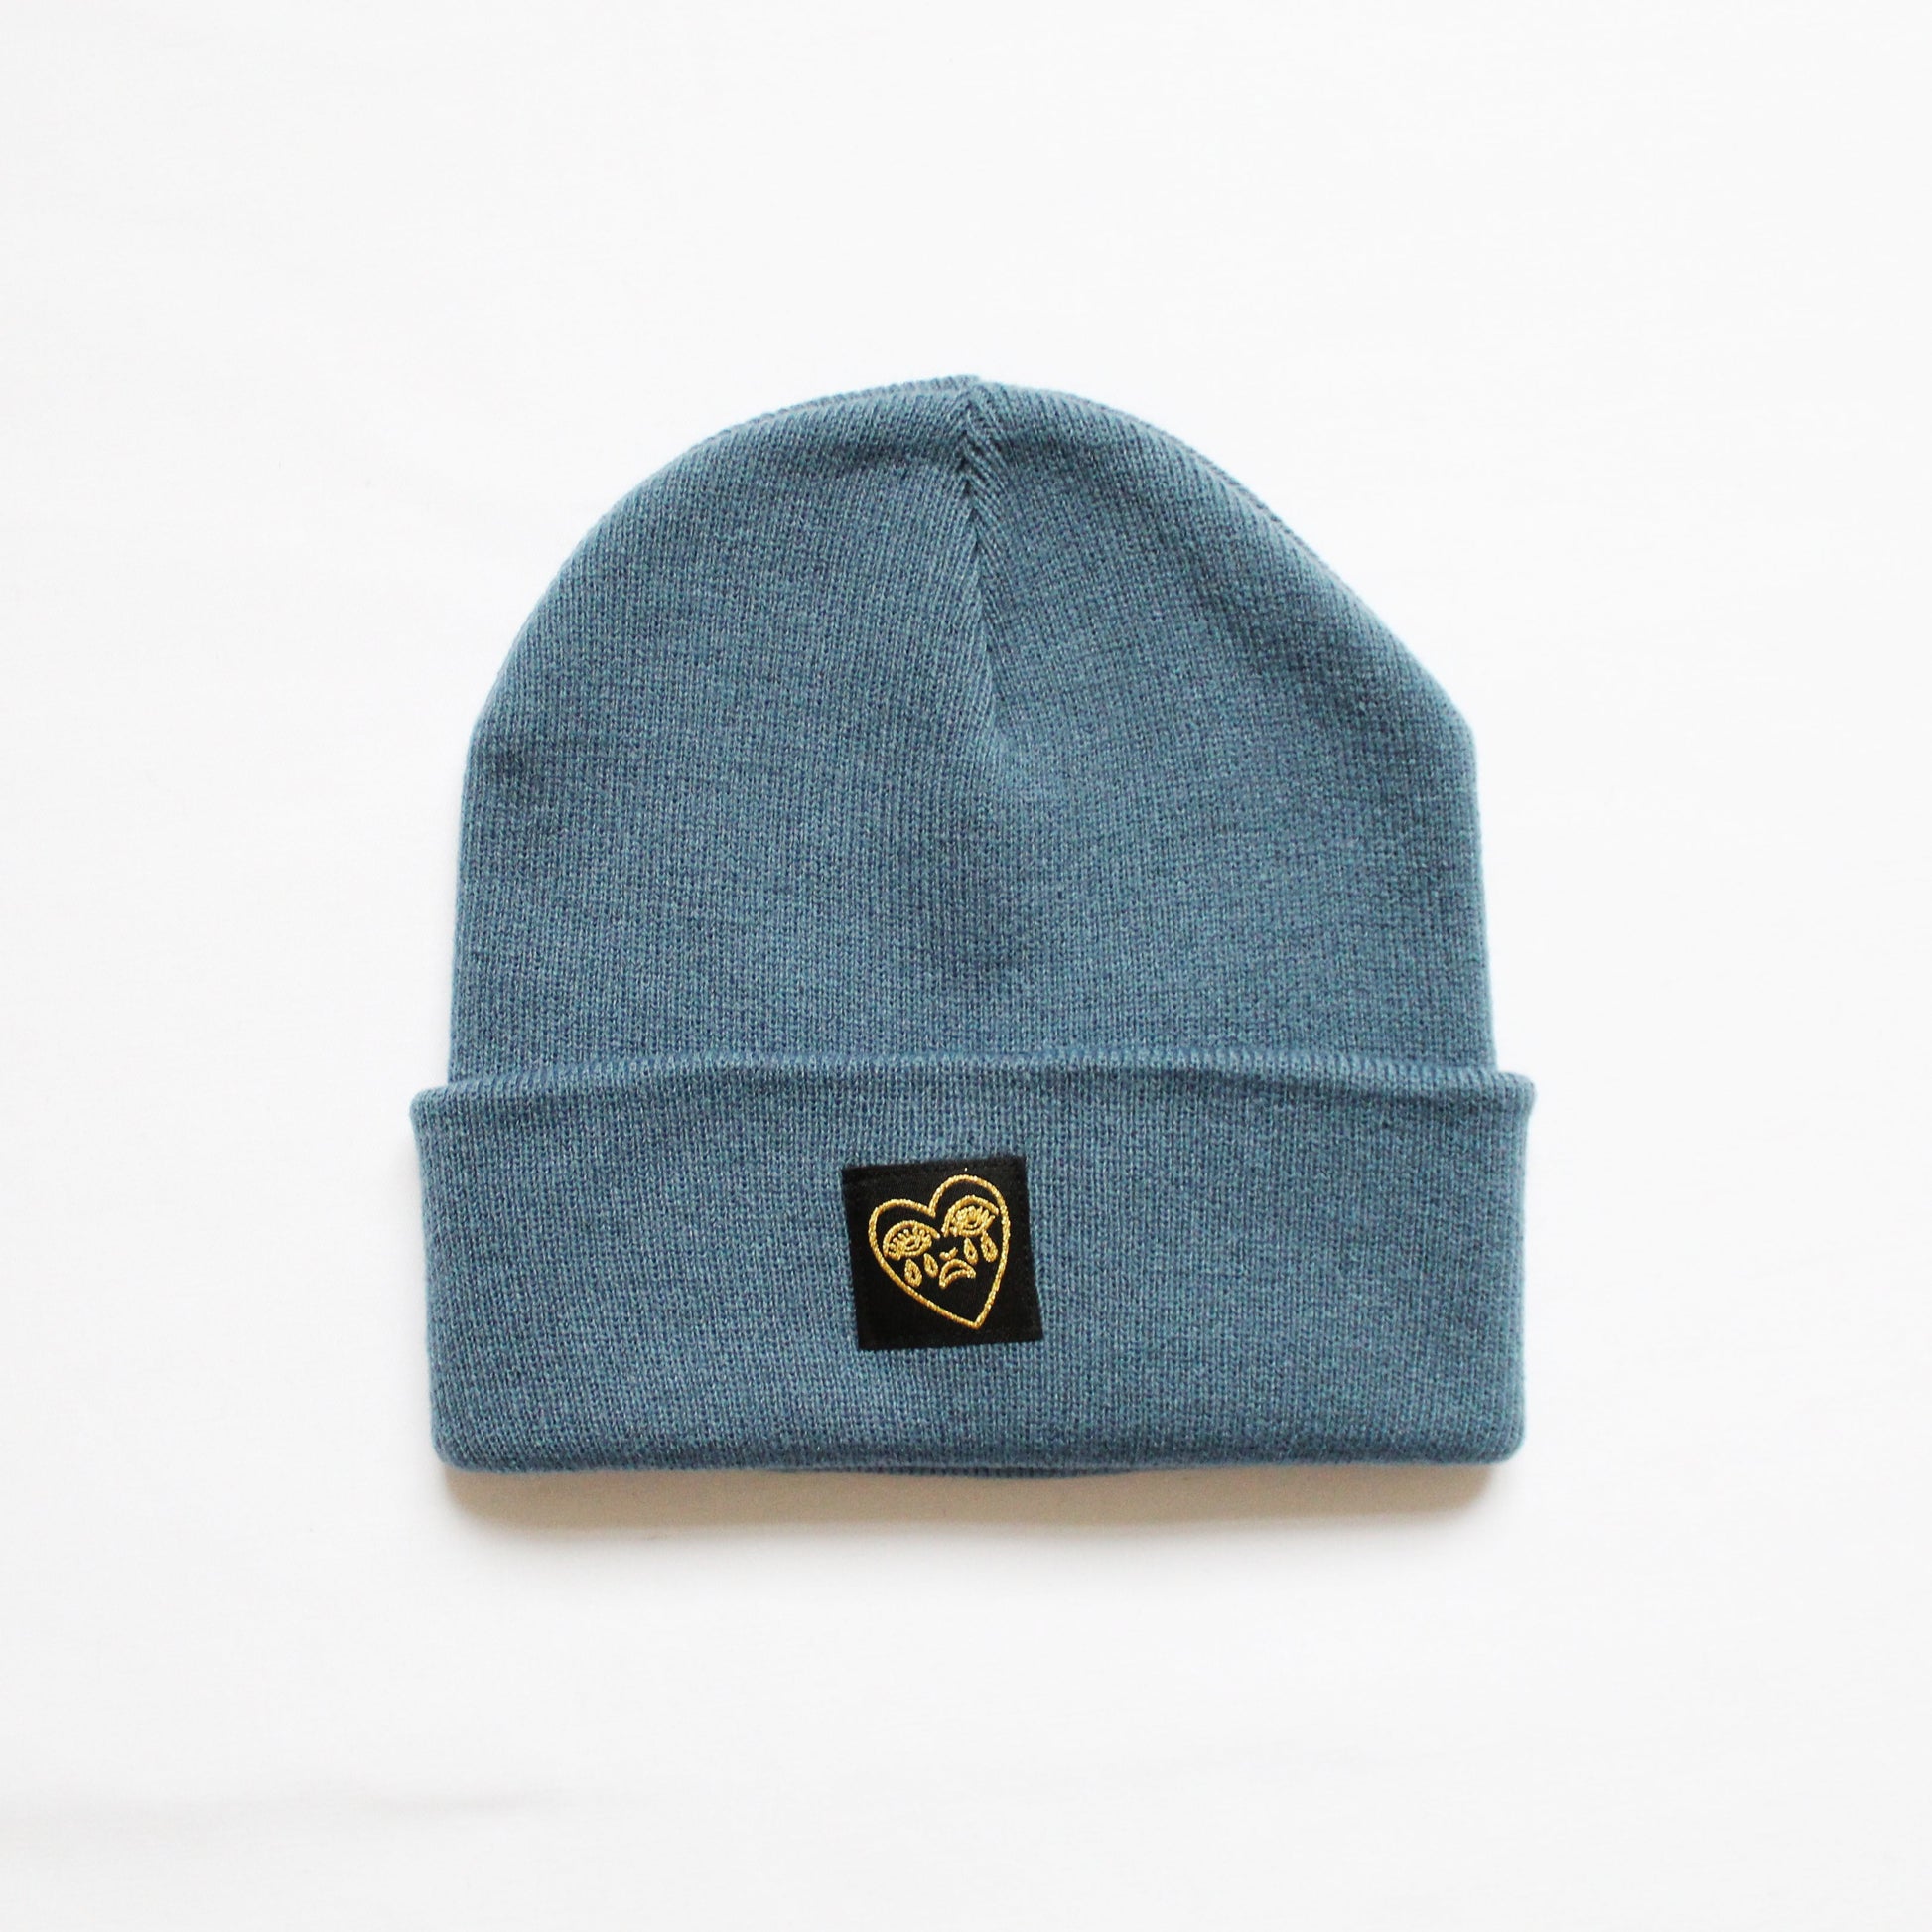 Crying Heart Classic Beanie - Airforce Blue